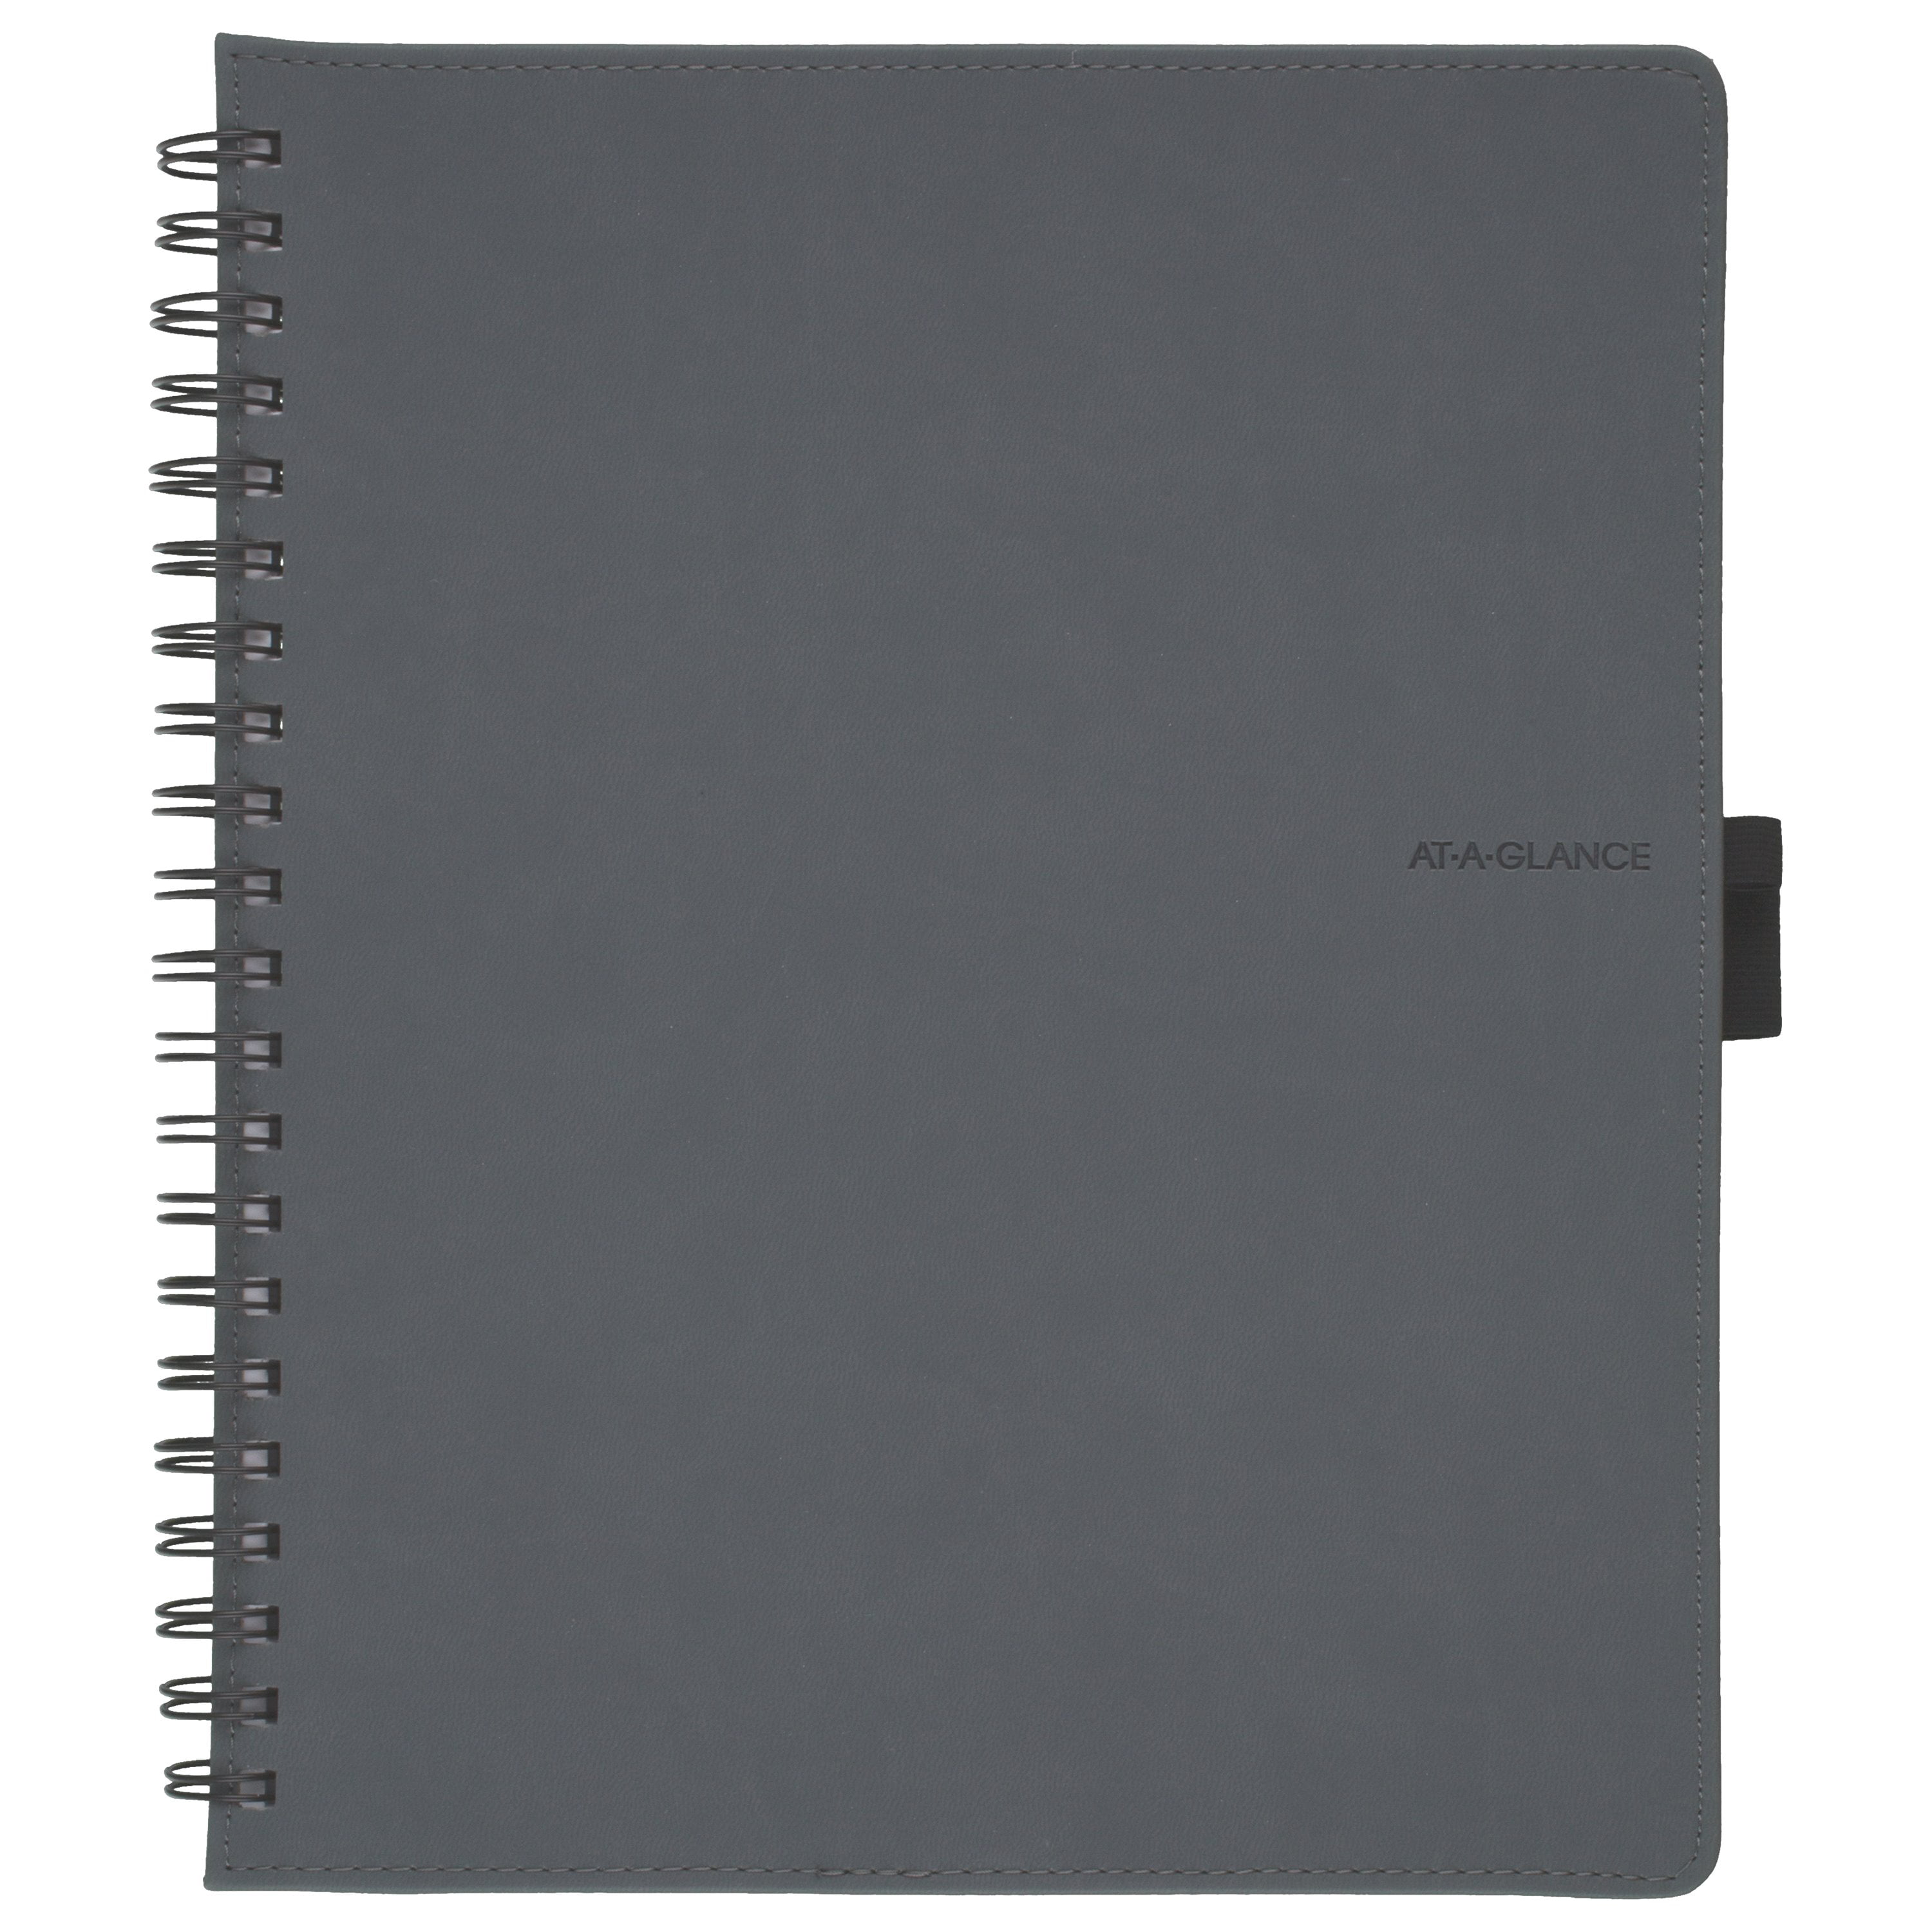 2020 At-A-Glance 70-907 Refill For 70-020 Executive Weekly Monthly Planner.